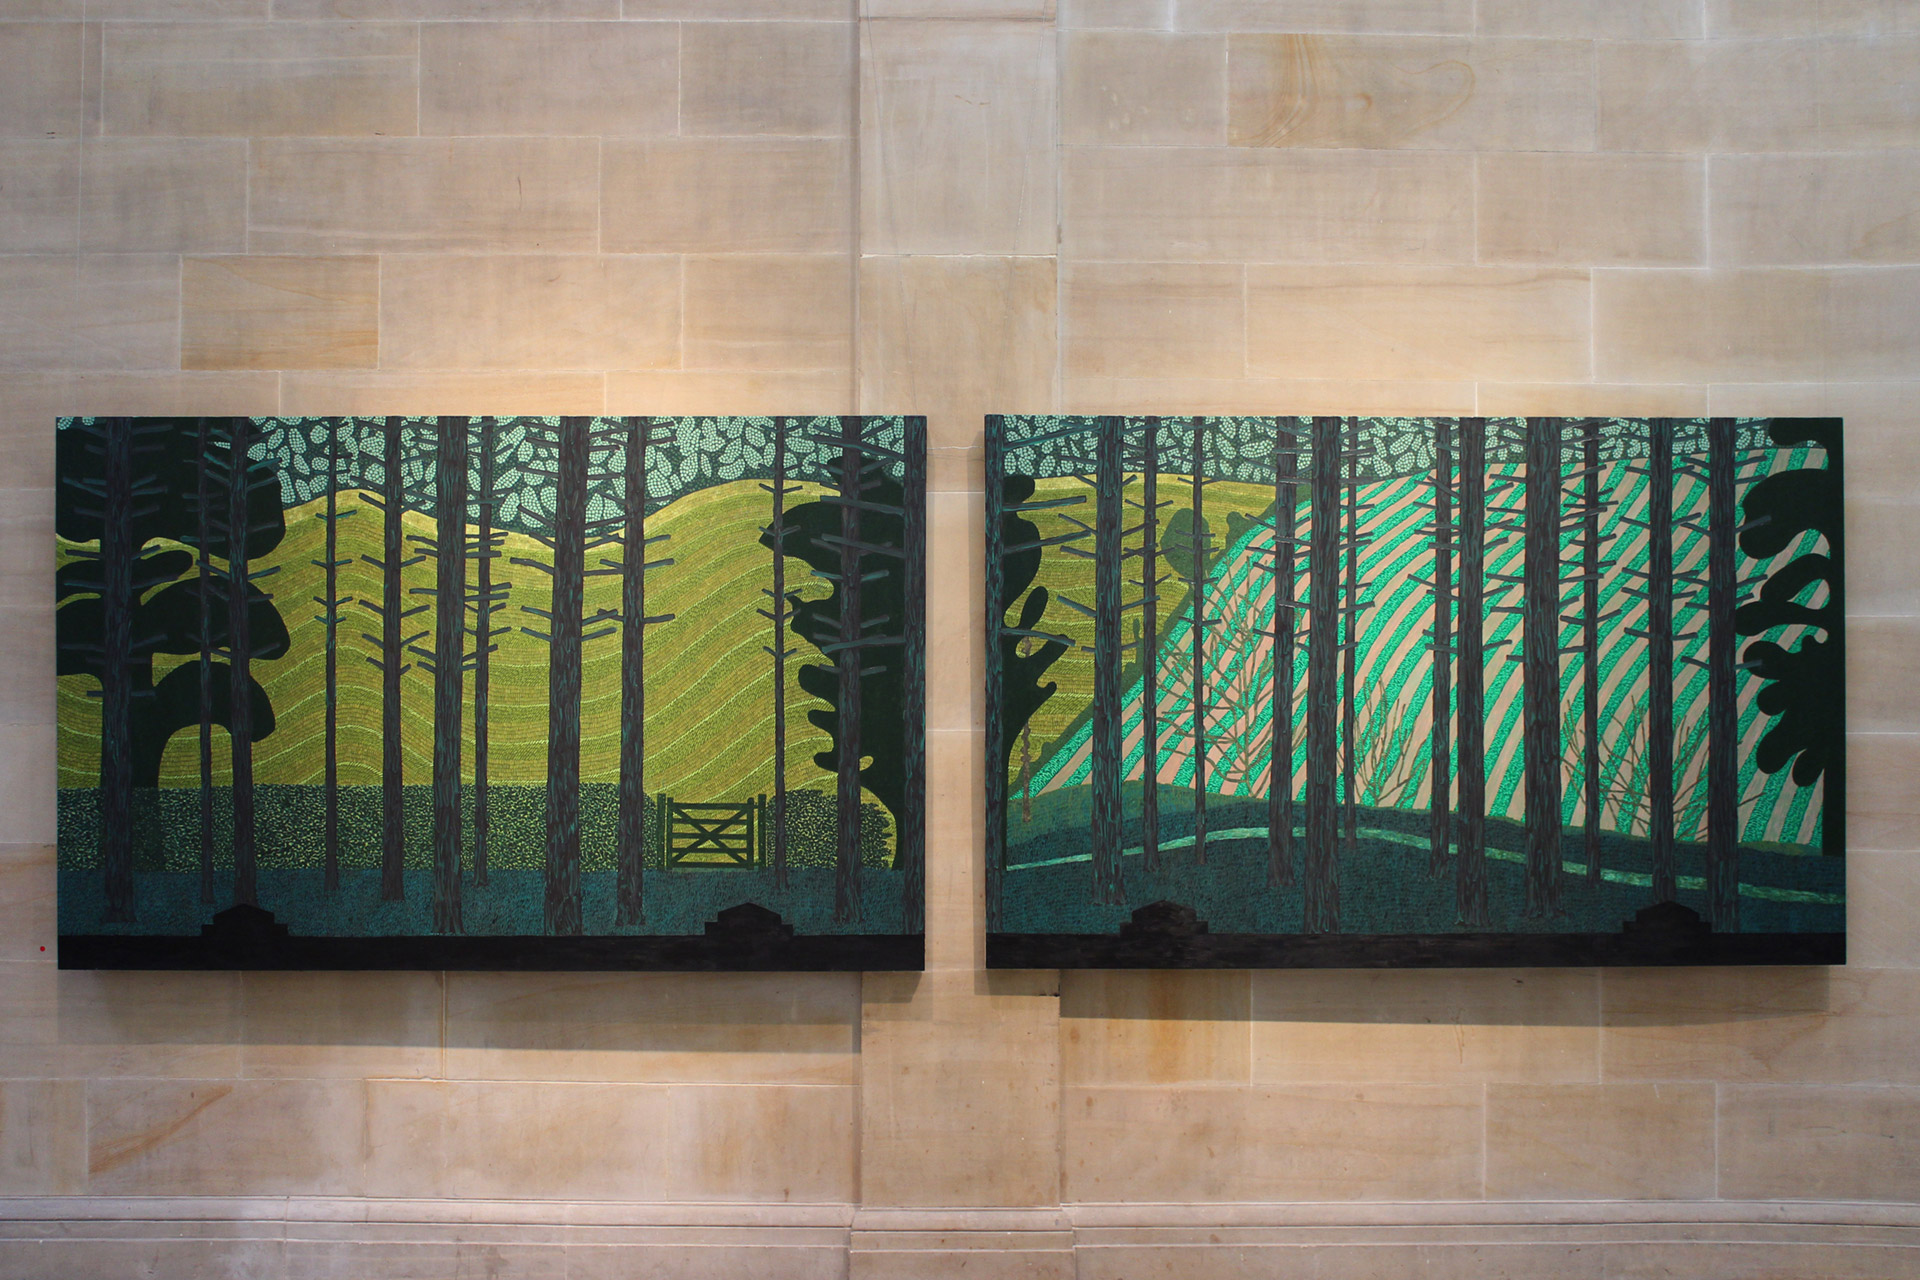 Katie Watson’s A Divided Landscape diptych in the Tonic Arts Collection